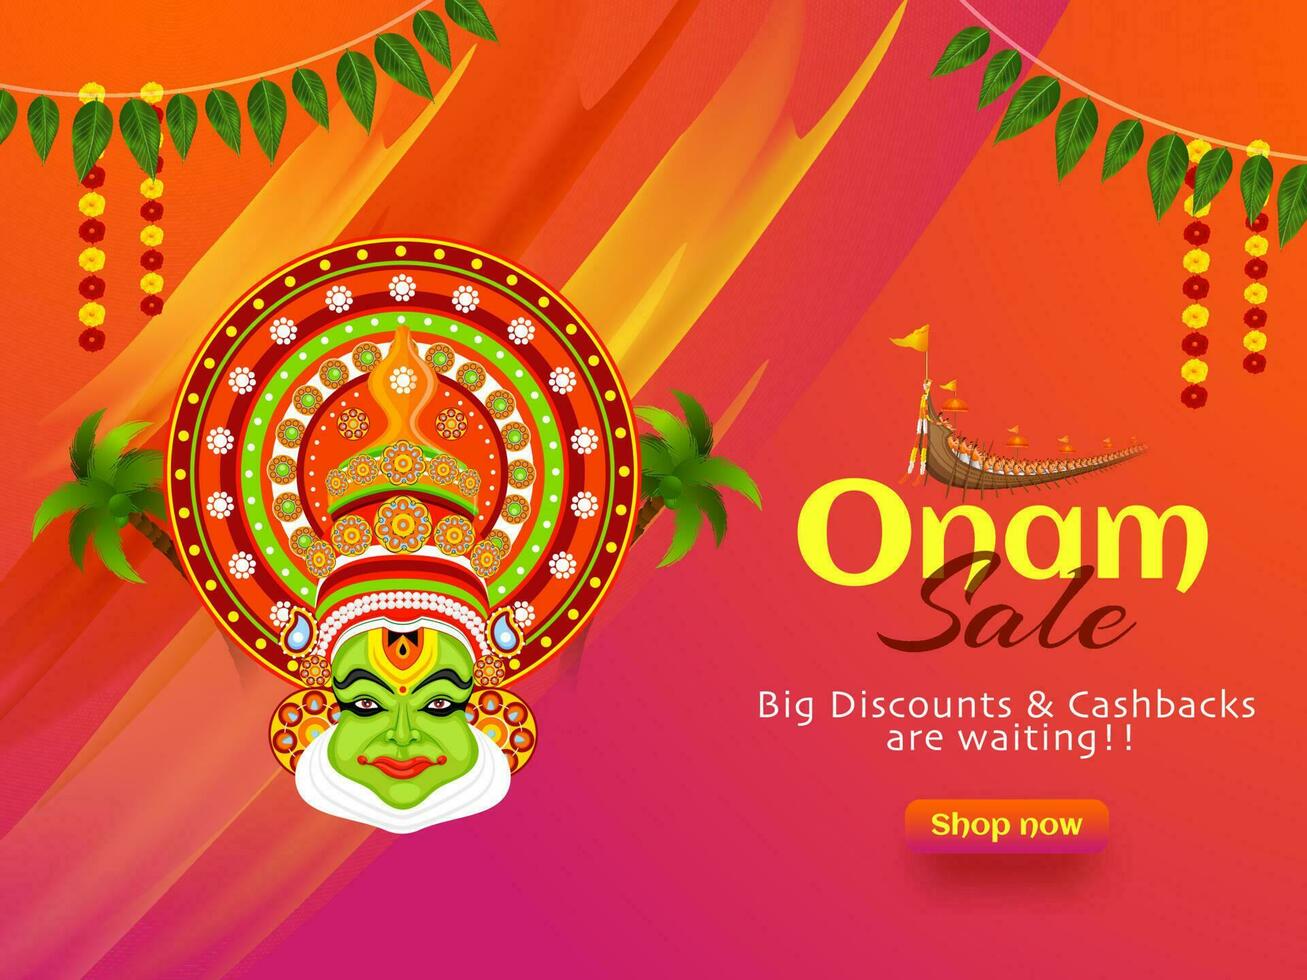 Happy Onam Sale poster or banner design with Big discount and Cashback offer and illustration of Kathakali dancer face on abstract background decorated with floral garland. vector